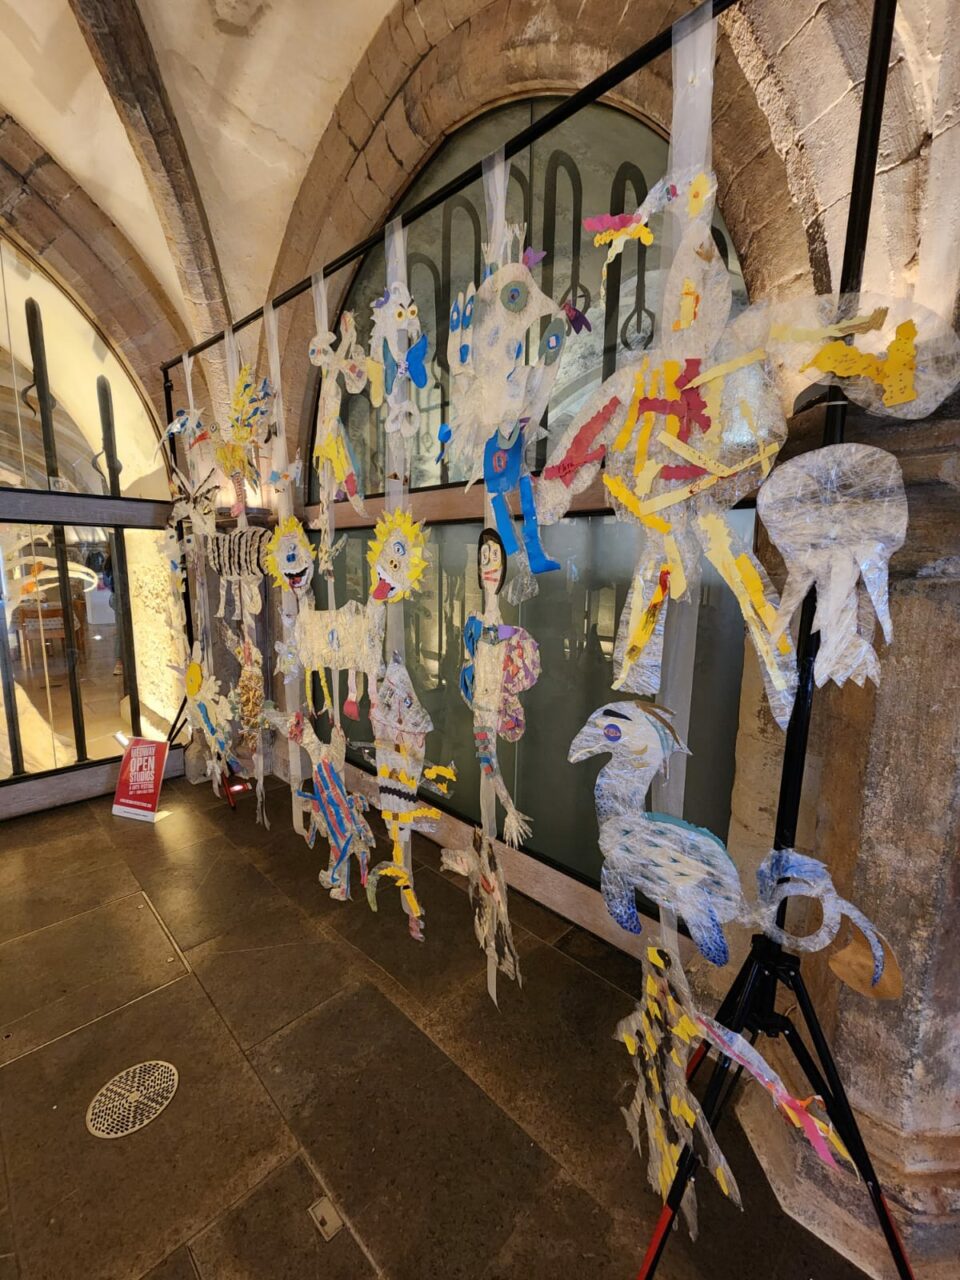 Medieval Monsters created with Cellotape sheets displayed on to the wall.